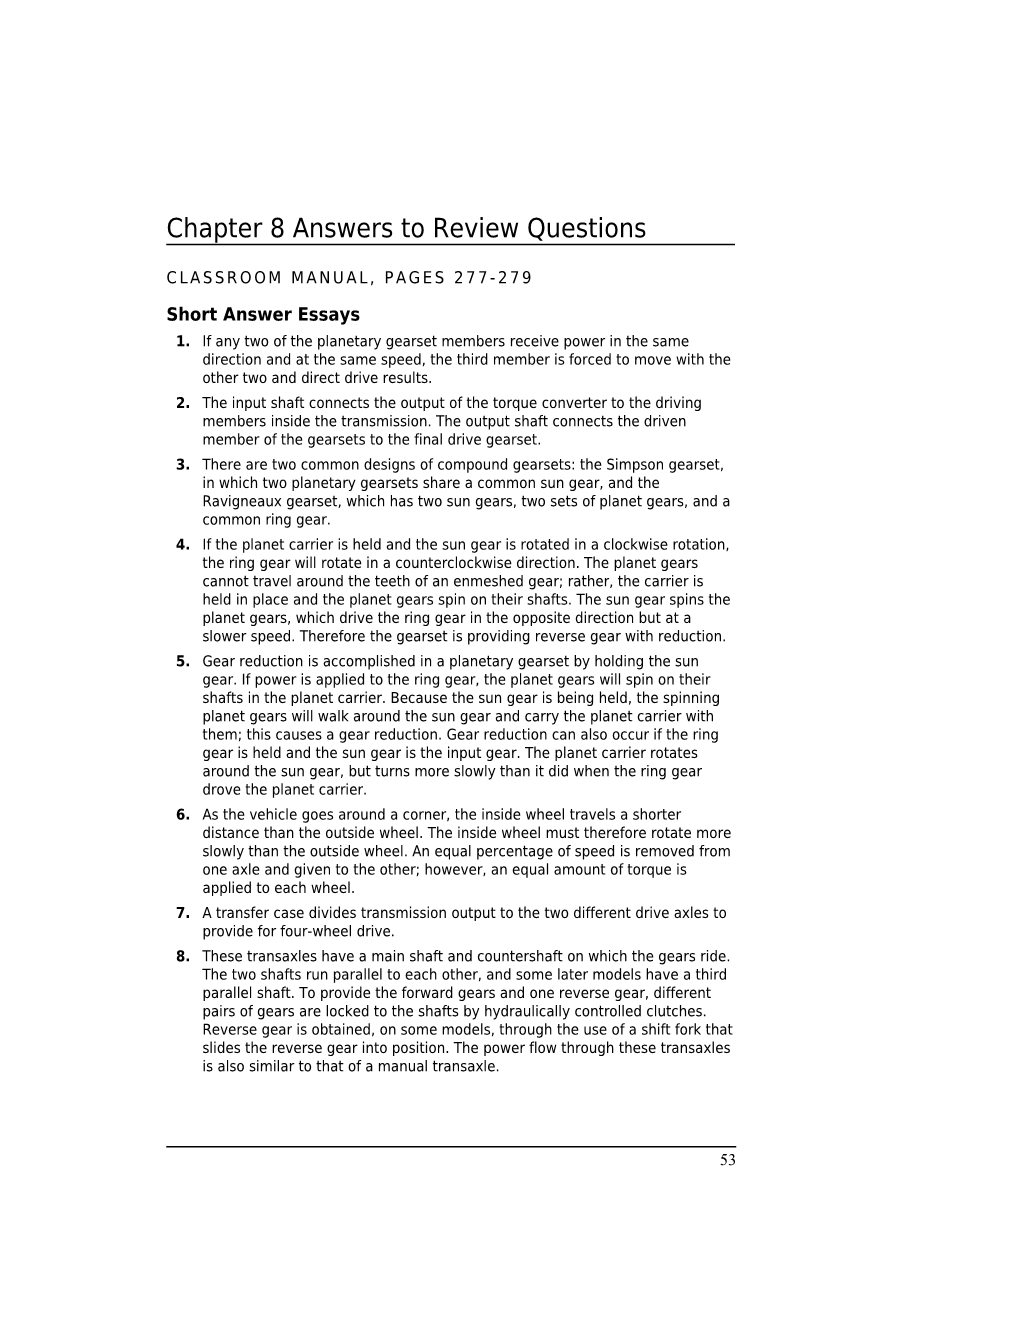 Chapter 8 Answers to Review Questions